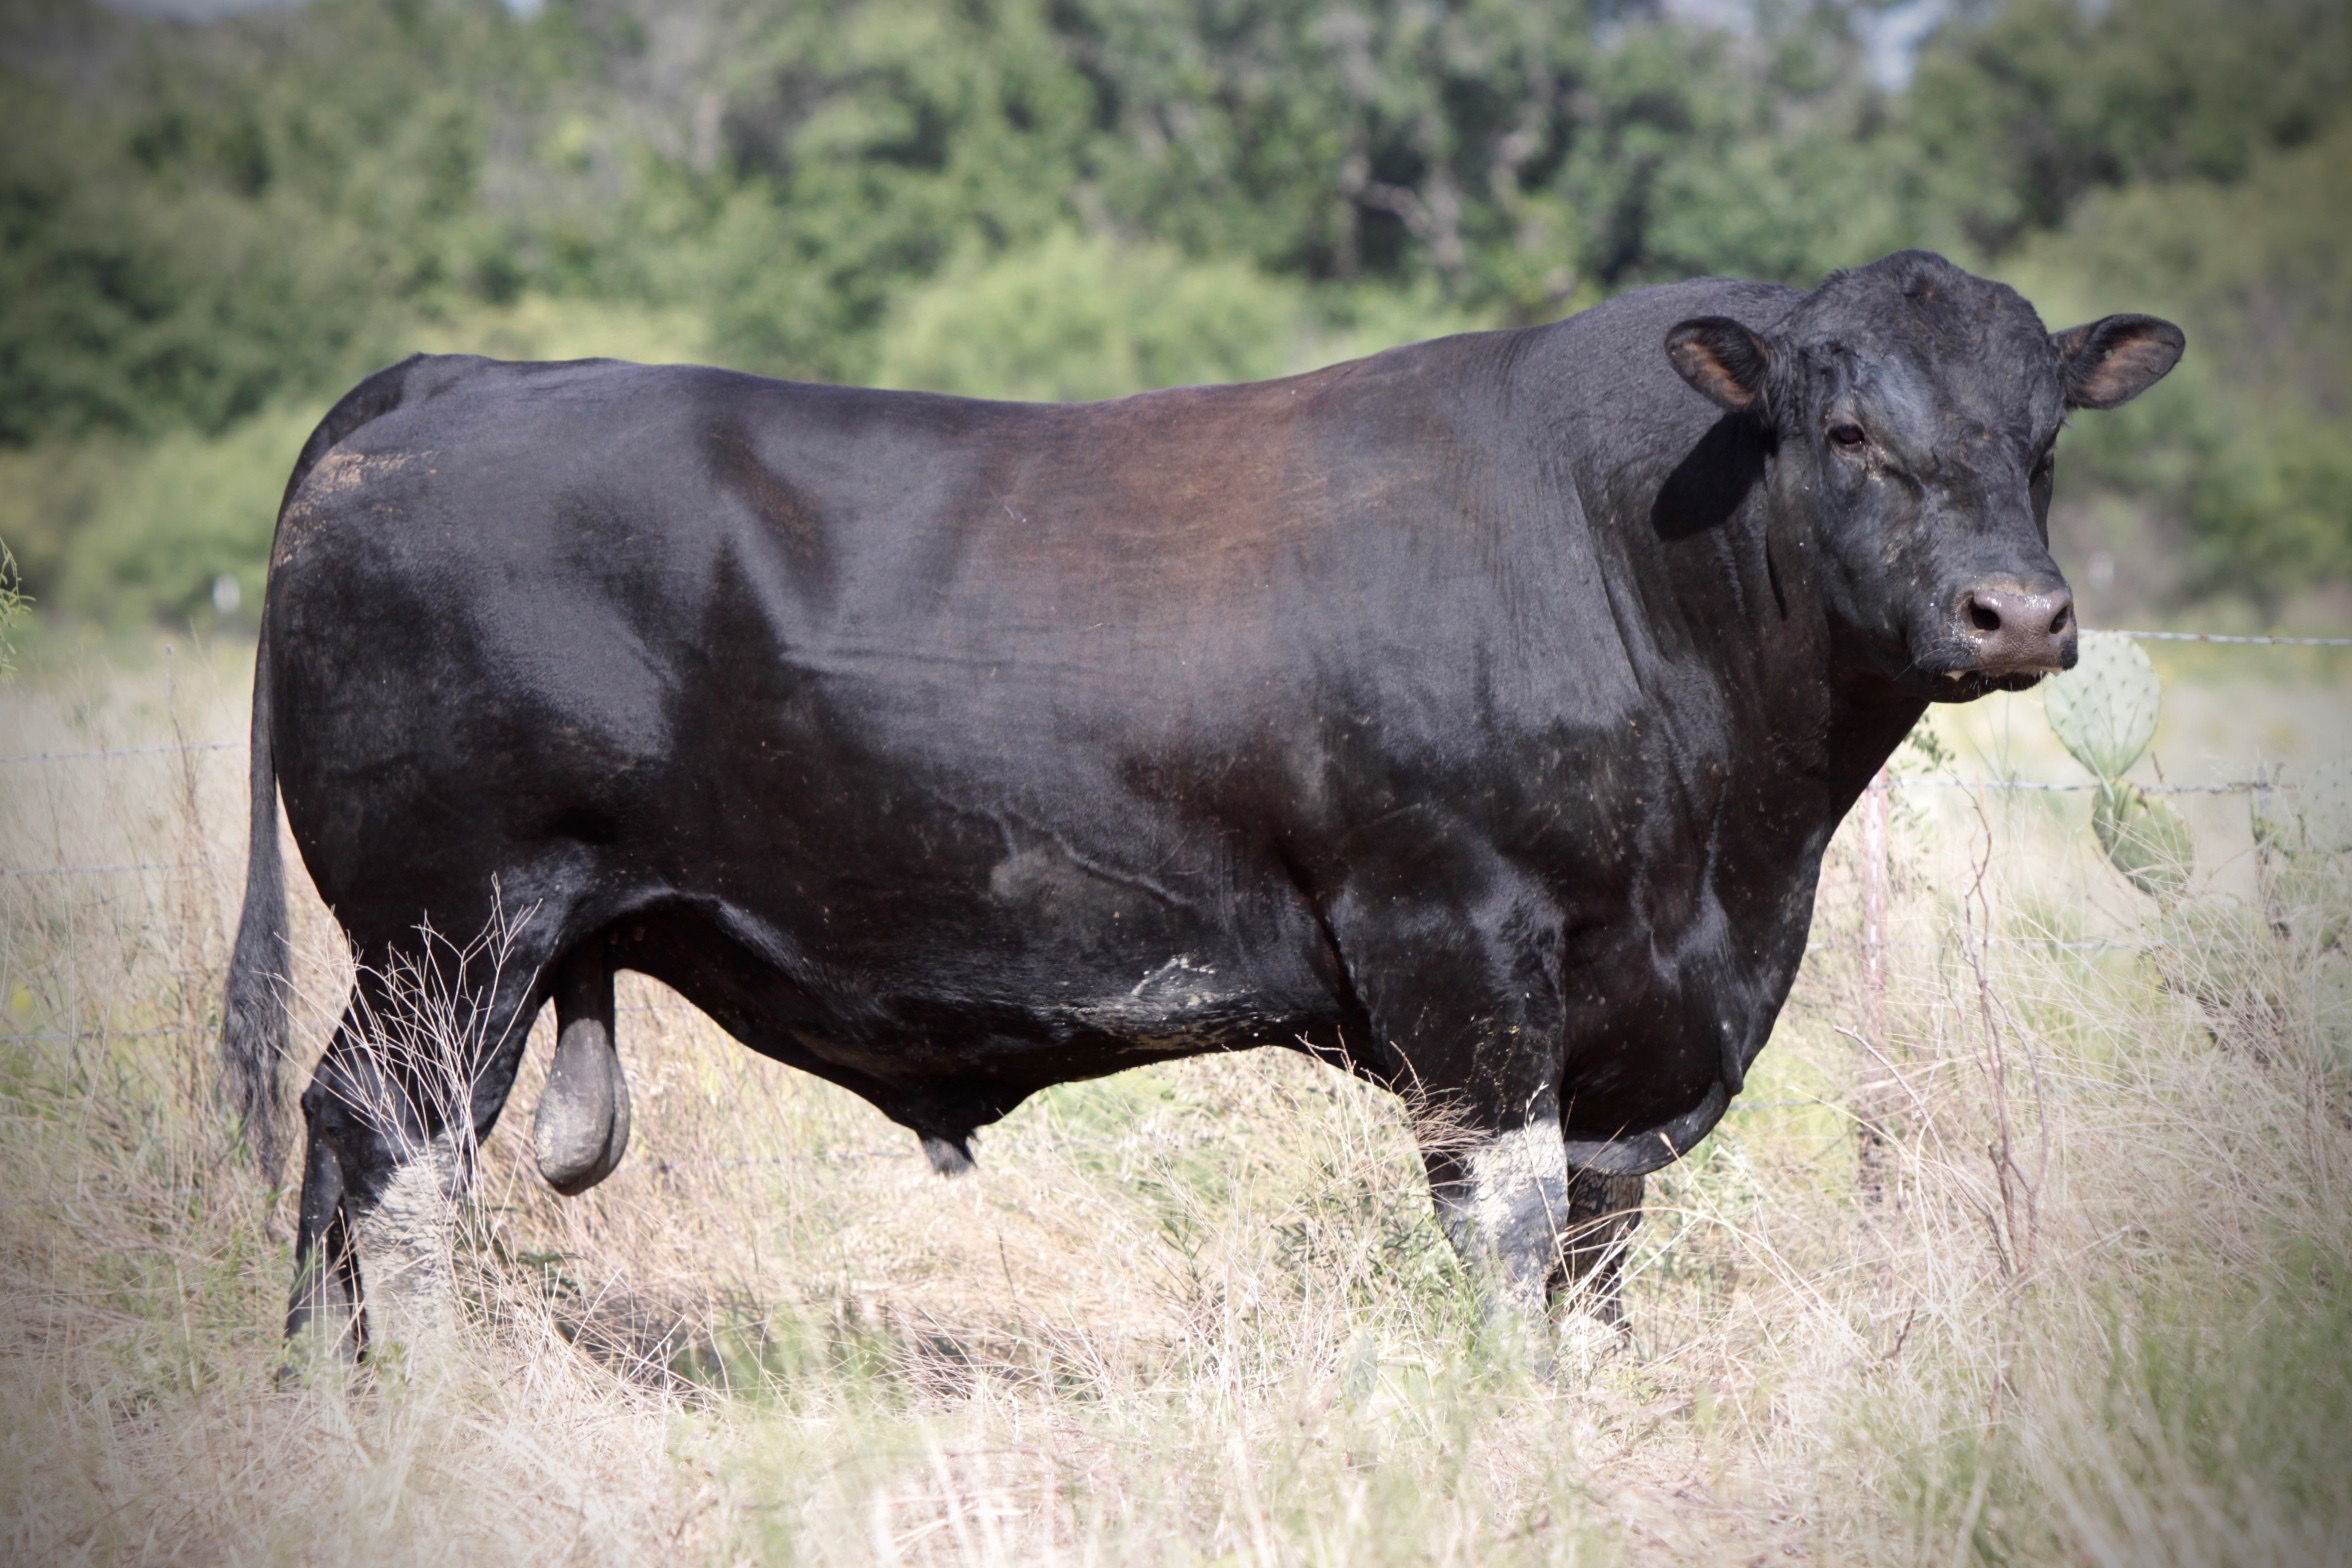 Livestock producers wanting to use Angus bulls can now test for a rare genetic condition that affects calves thanks to research initiated by Texas A&M AgriLife Extension Service beef cattle specialists. (Courtesy photo)